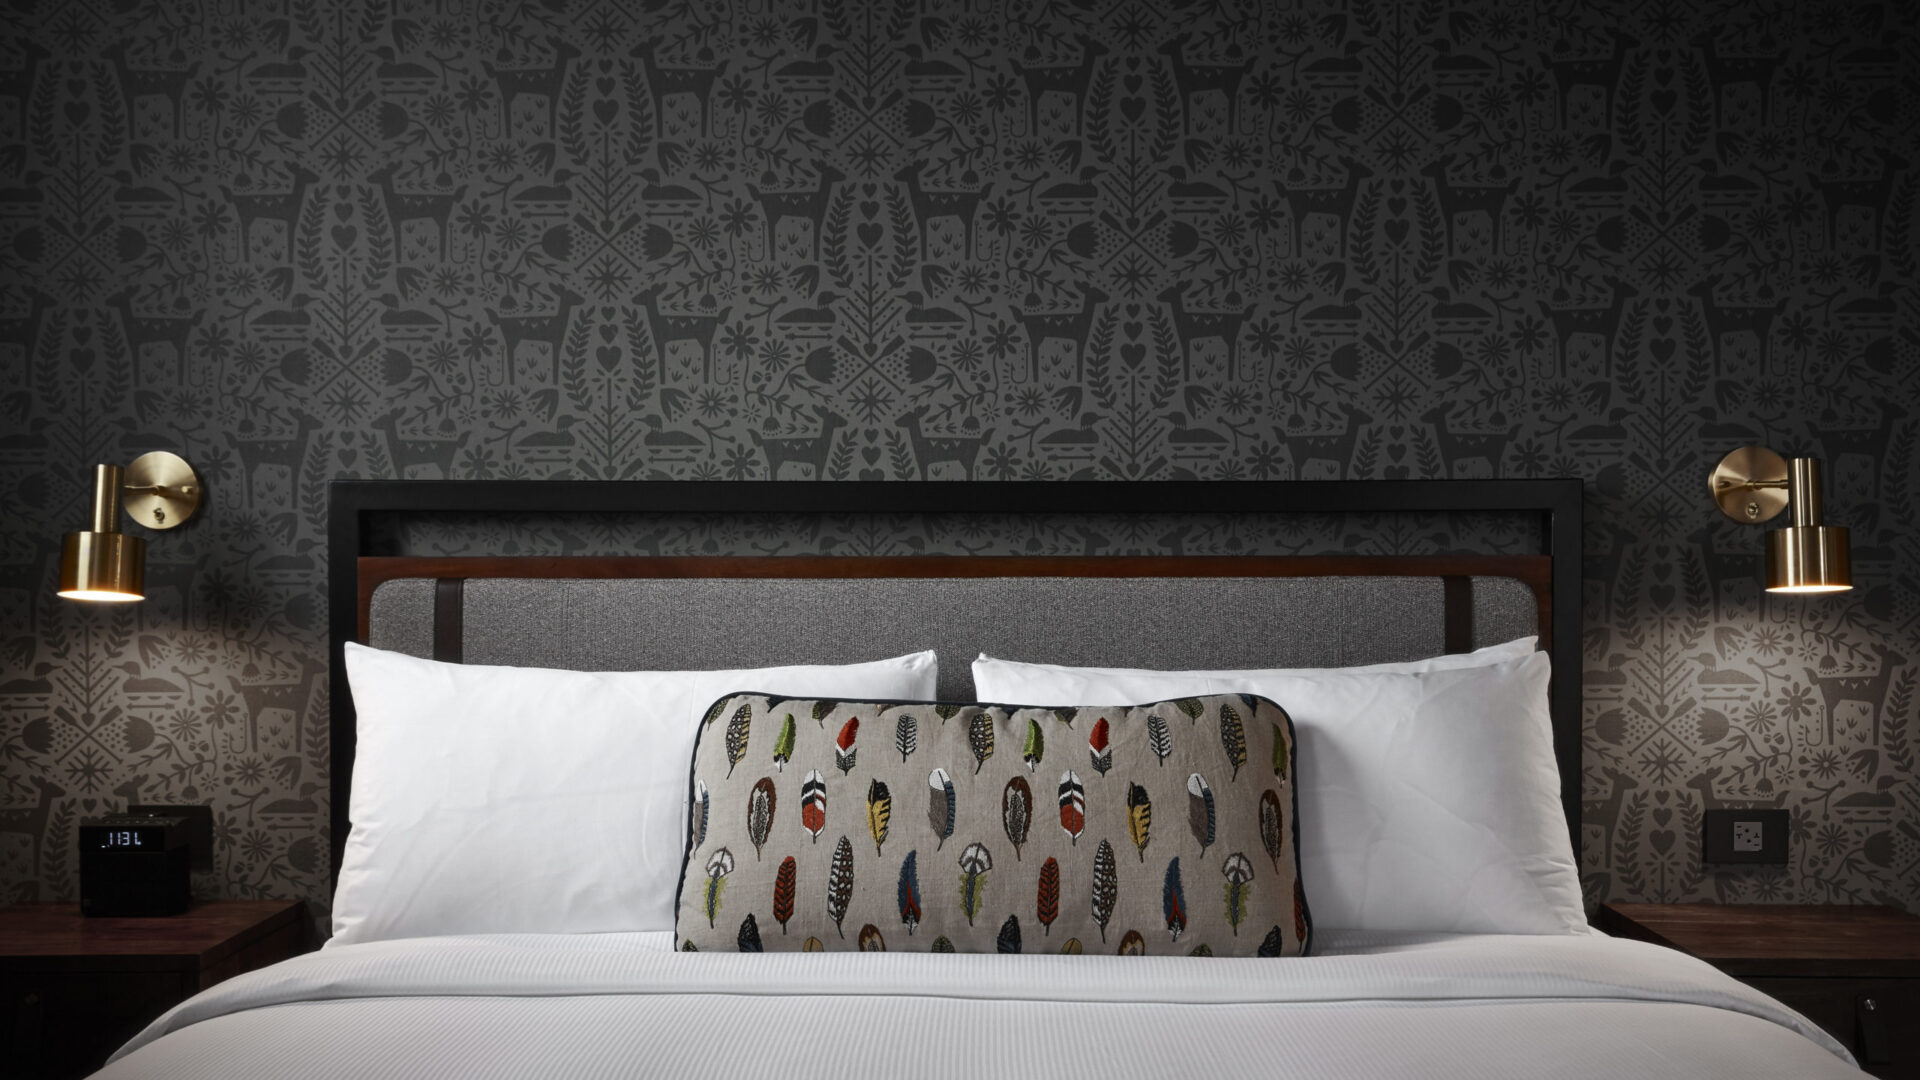 Wildlife-themed wallpaper over the head of a North Loop hotel bed